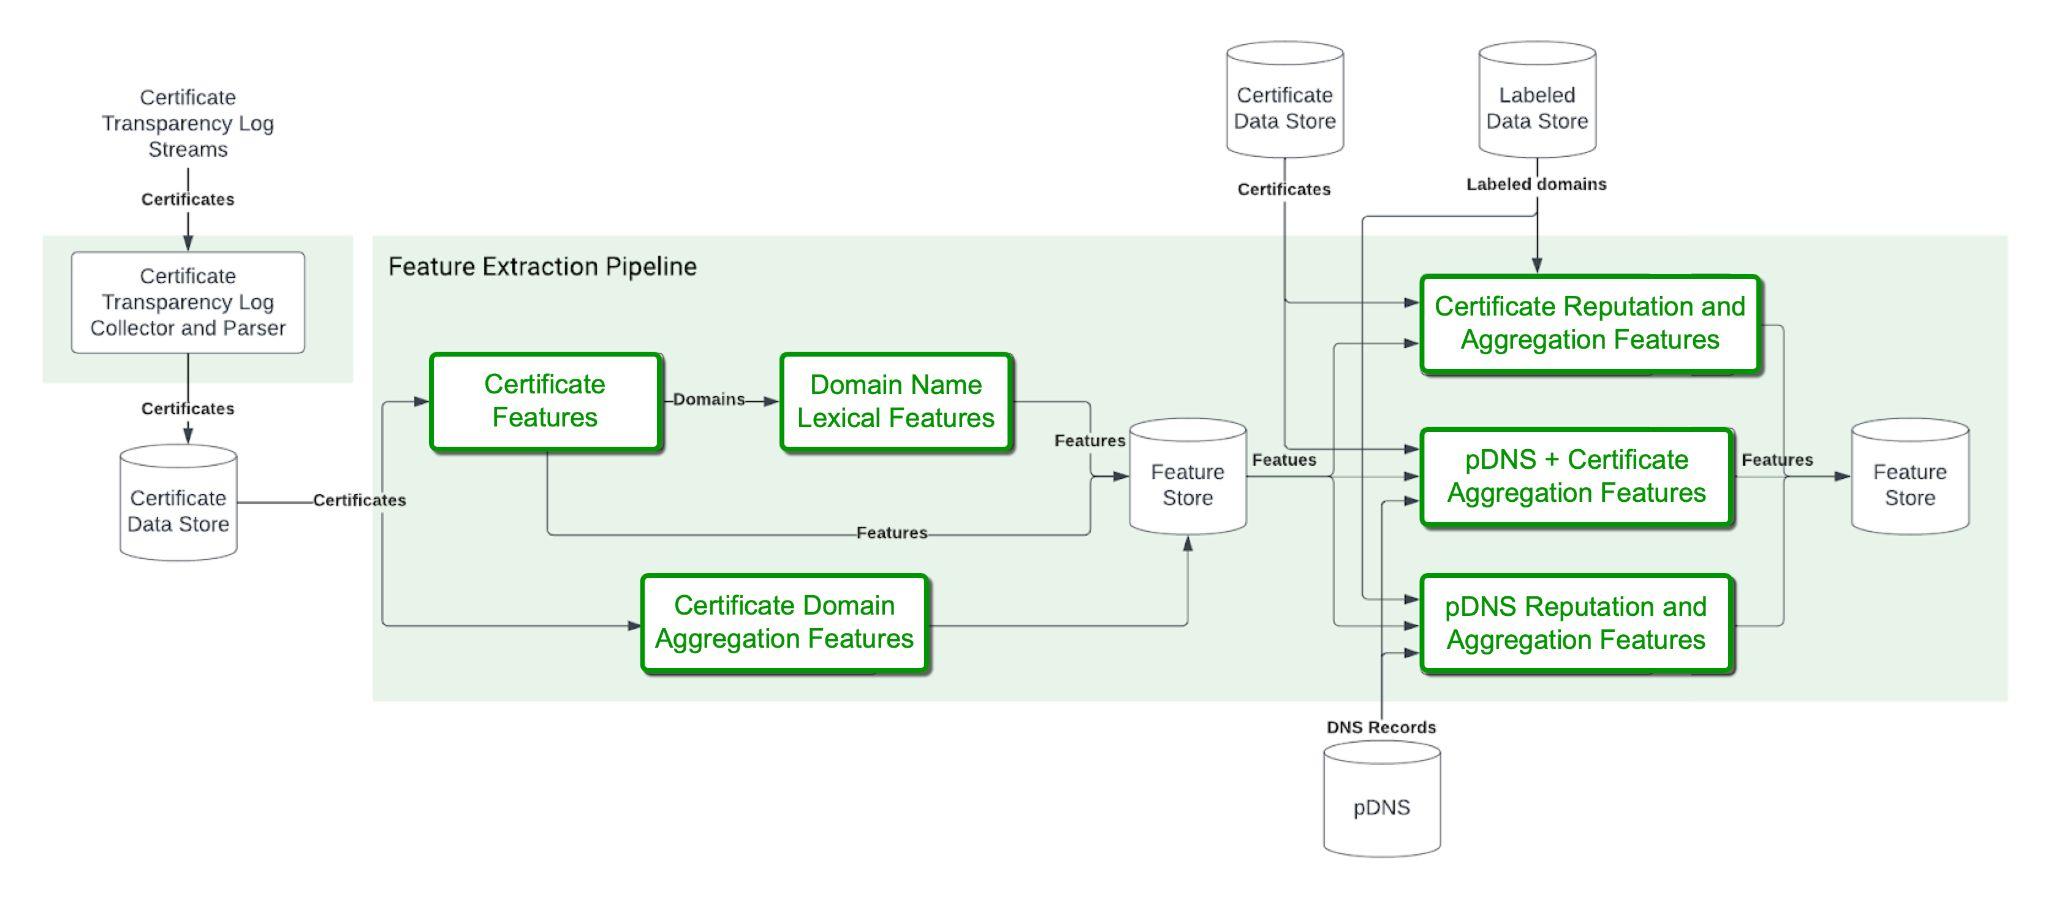 Image 2 is an overview diagram of the stockpiled detector’s features extraction pipeline. It starts with the certificates, moves to features and domains, continues to the label domains, and ends at the feature store.